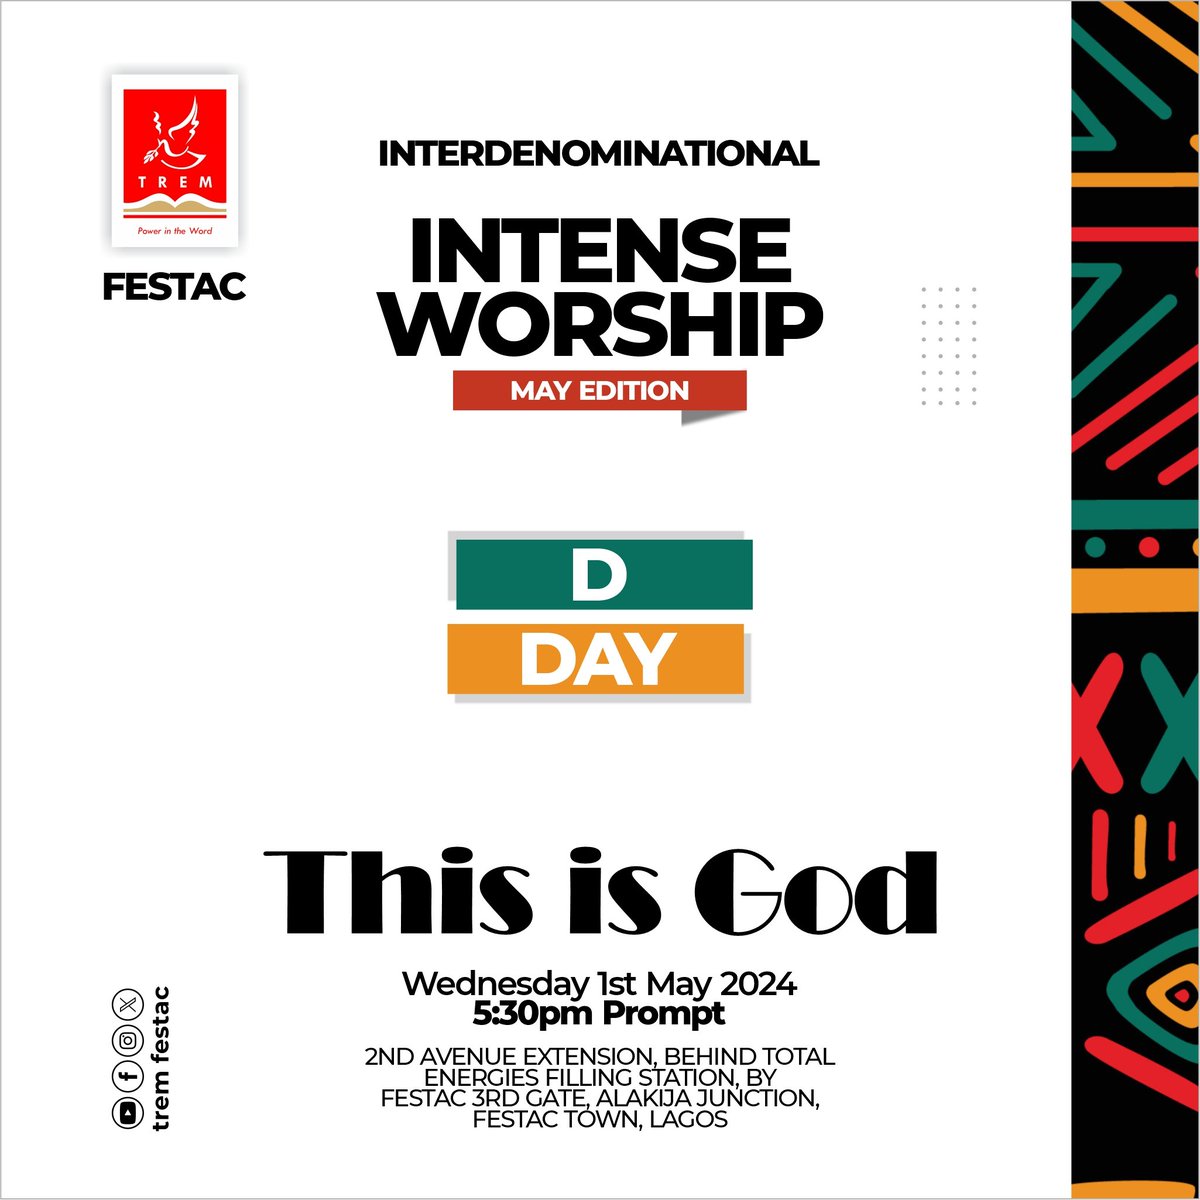 Psalms 29:2 ~ Give unto the Lord the glory due to His name; Worship the Lord in the beauty of holiness. 

@tremfestac @SpiricocoNg @festaconline

#TREM #TREMFESTAC #Intense #Worship #ThisIsGod #IntenseWorship